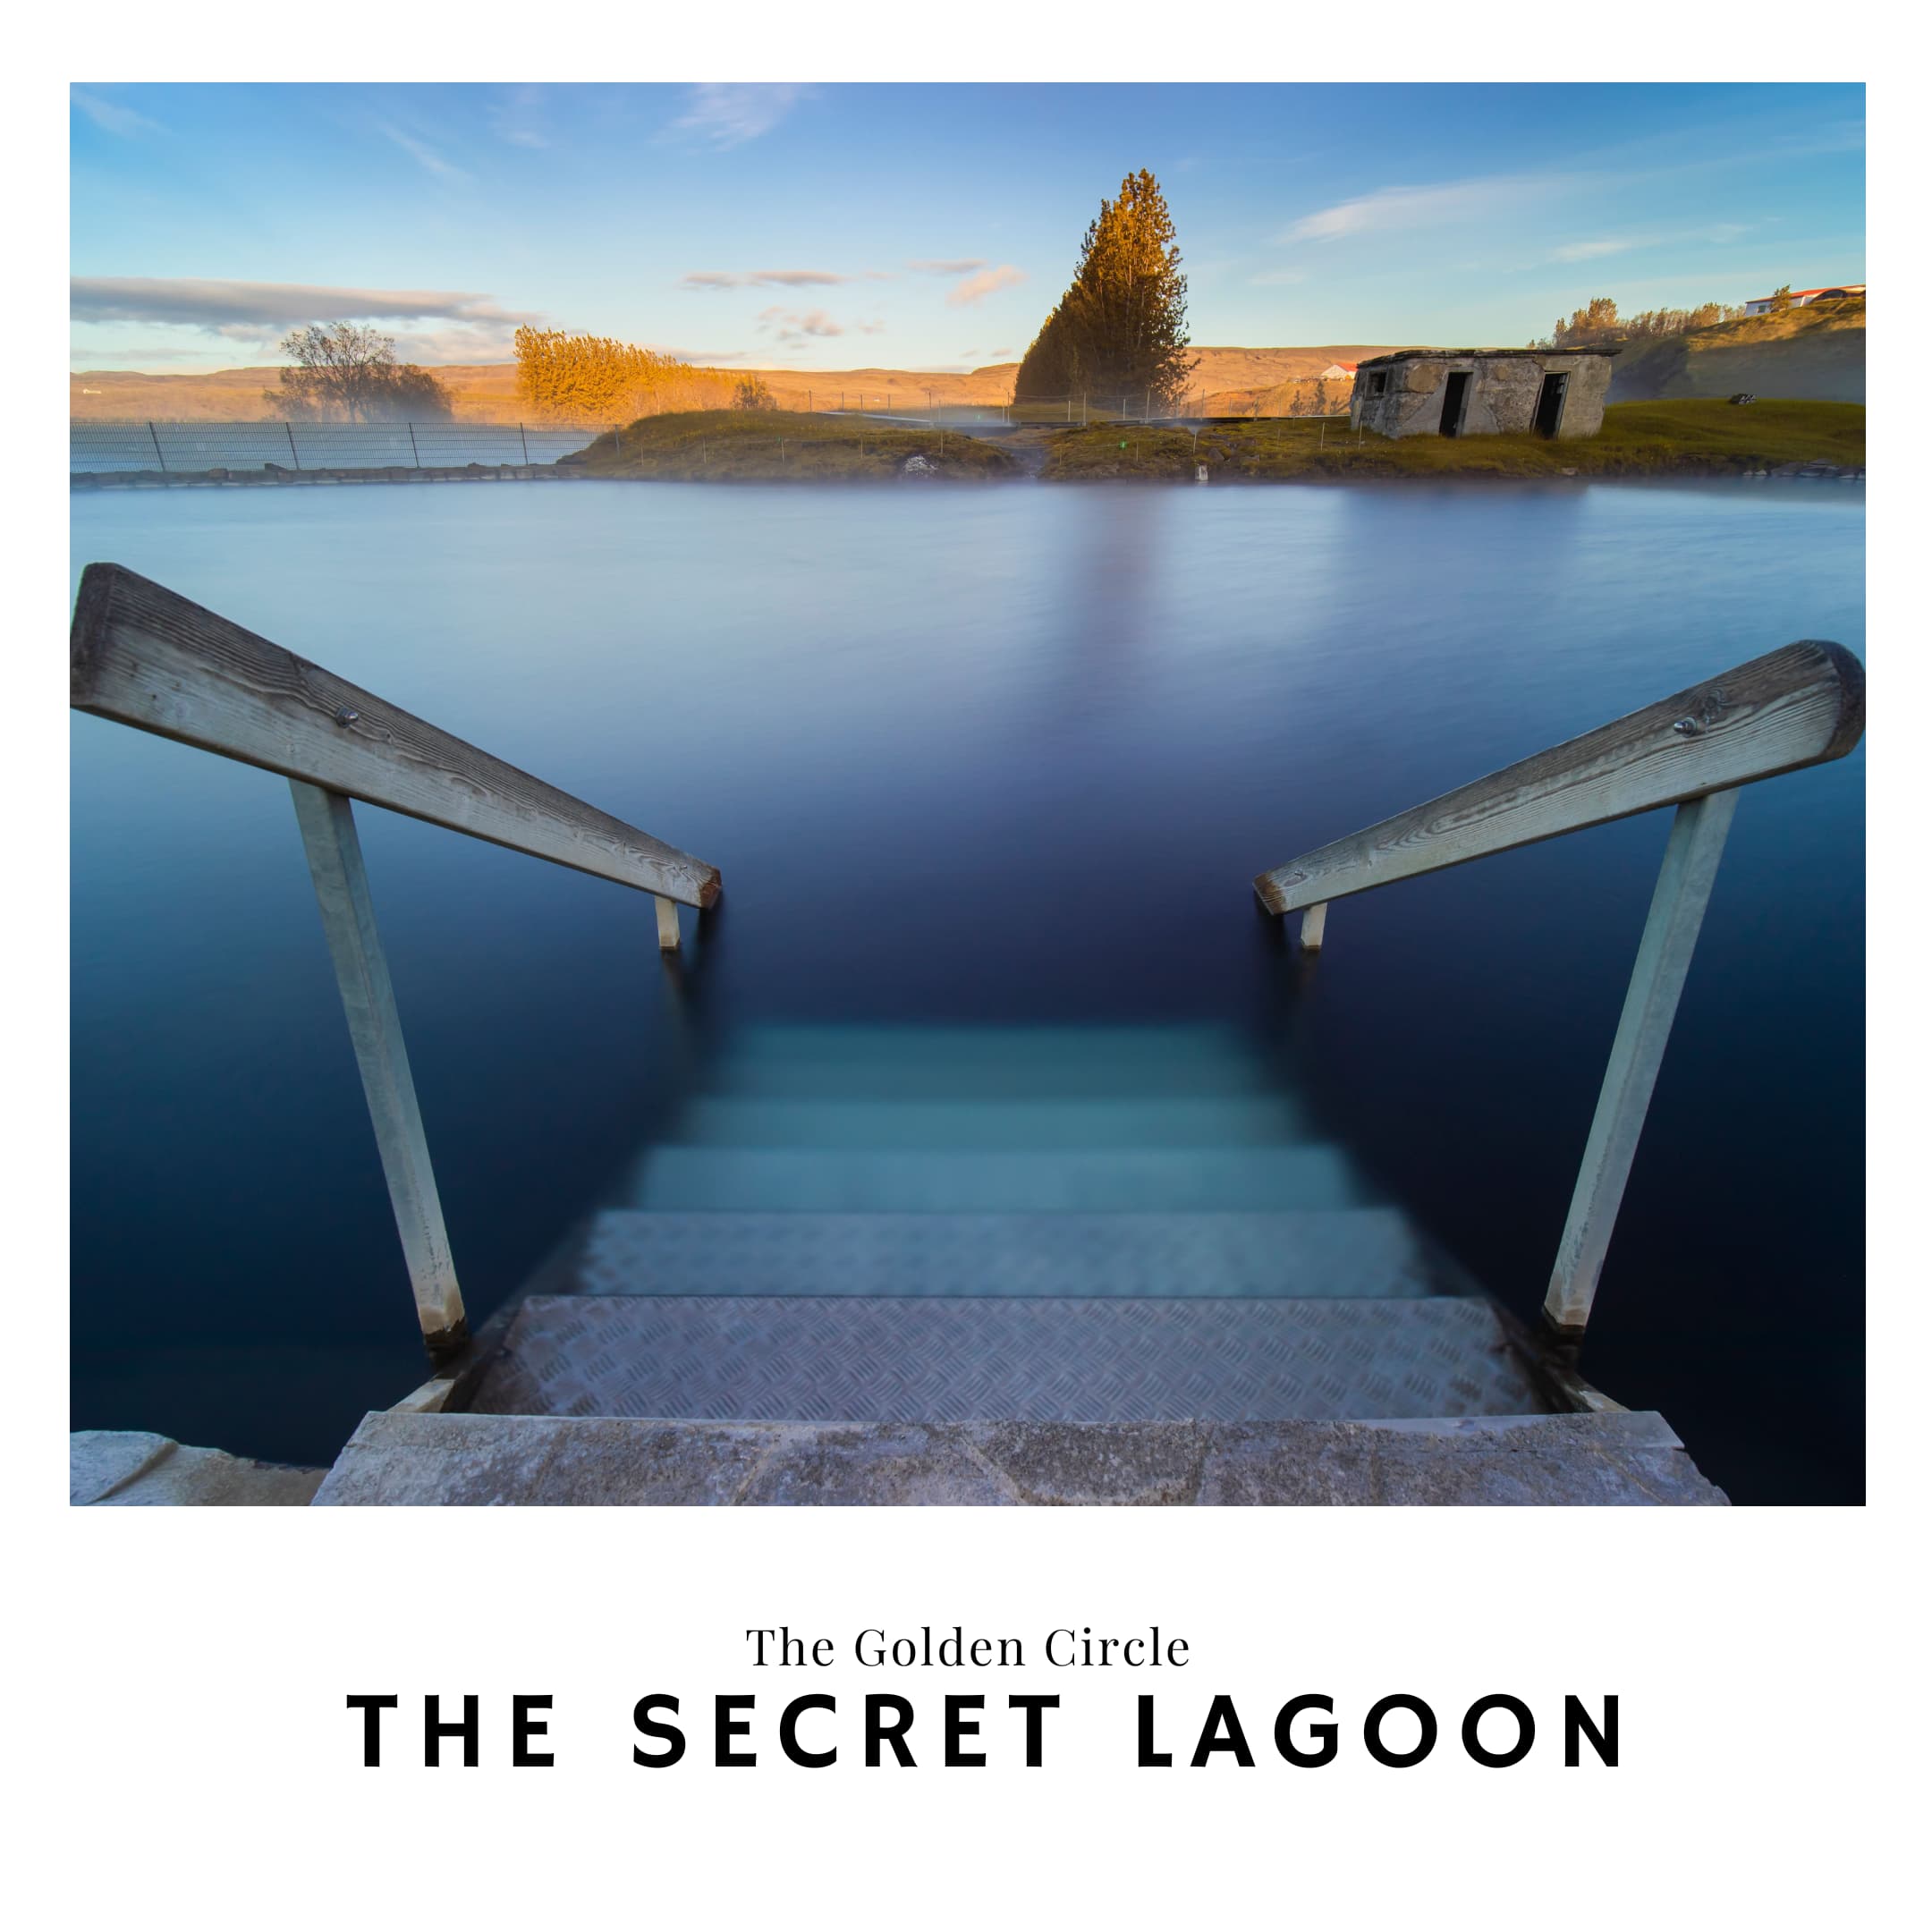 Link to the Secret Lagoon Travel guide on the golden circle iceland